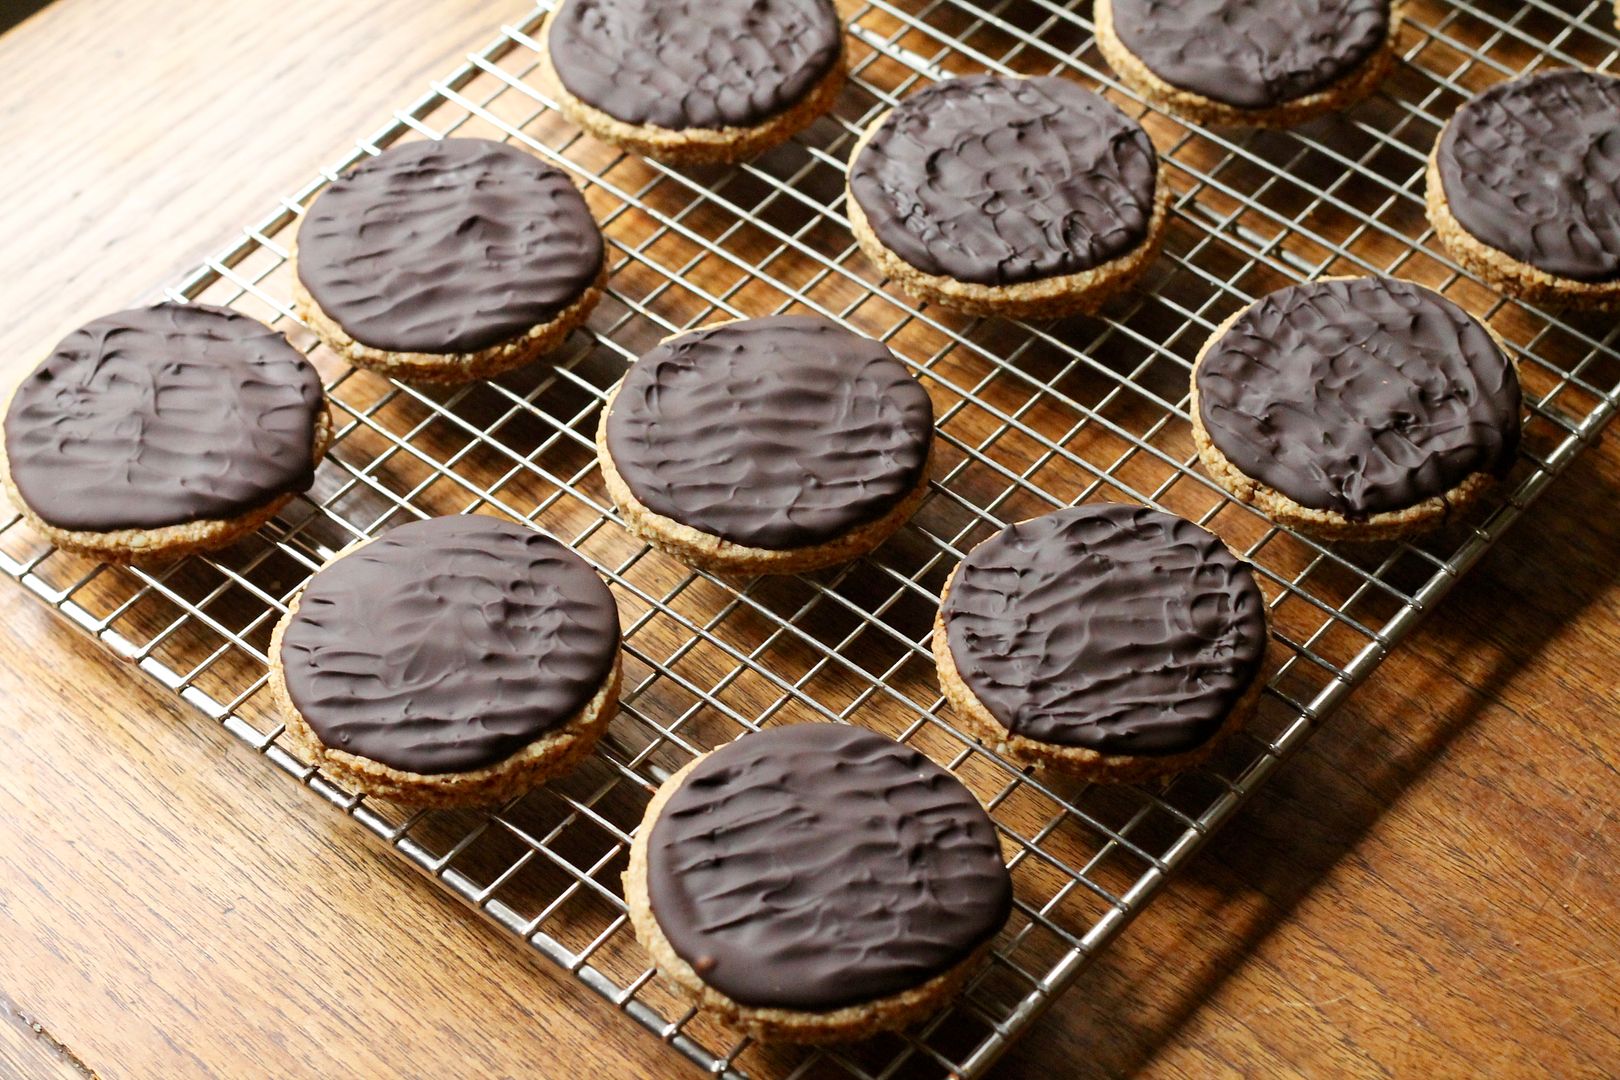 Chocolate-Covered Digestive Biscuits | Korena in the Kitchen